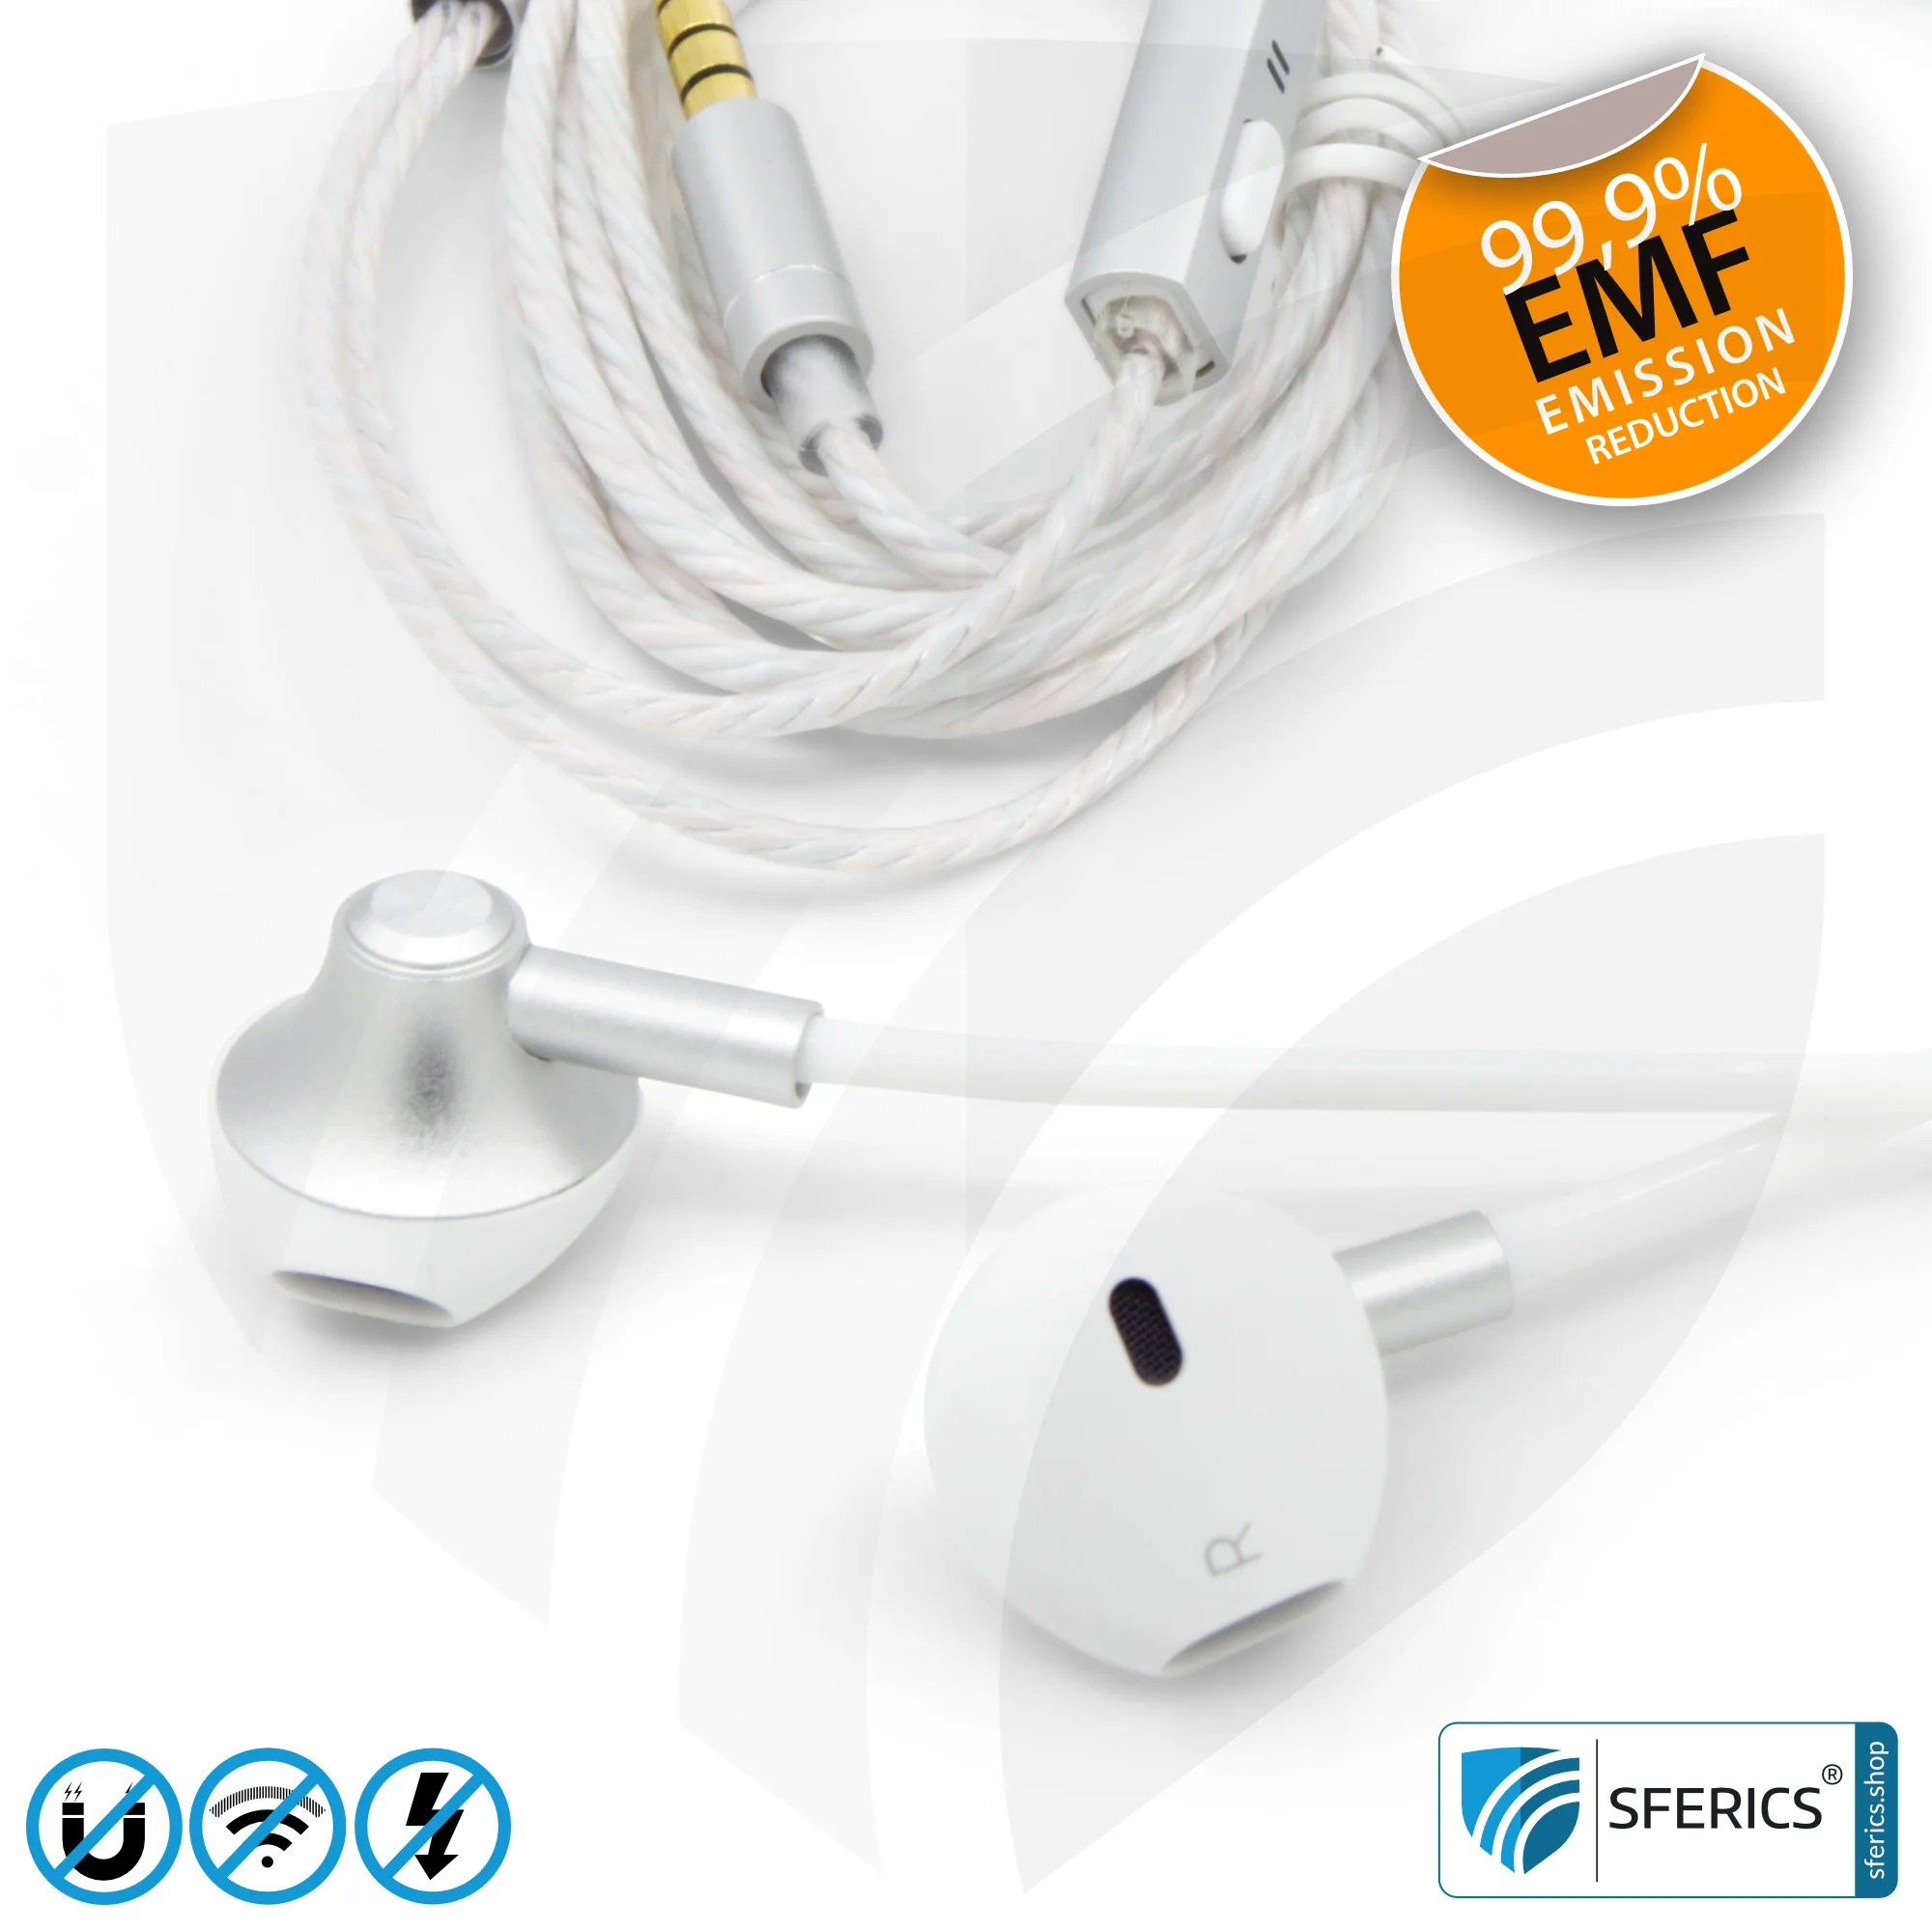 Air Tube Stereo Headset with Microphone | Air Tube MINI | radiation-free technology without electrosmog | white-silver | with jack plug